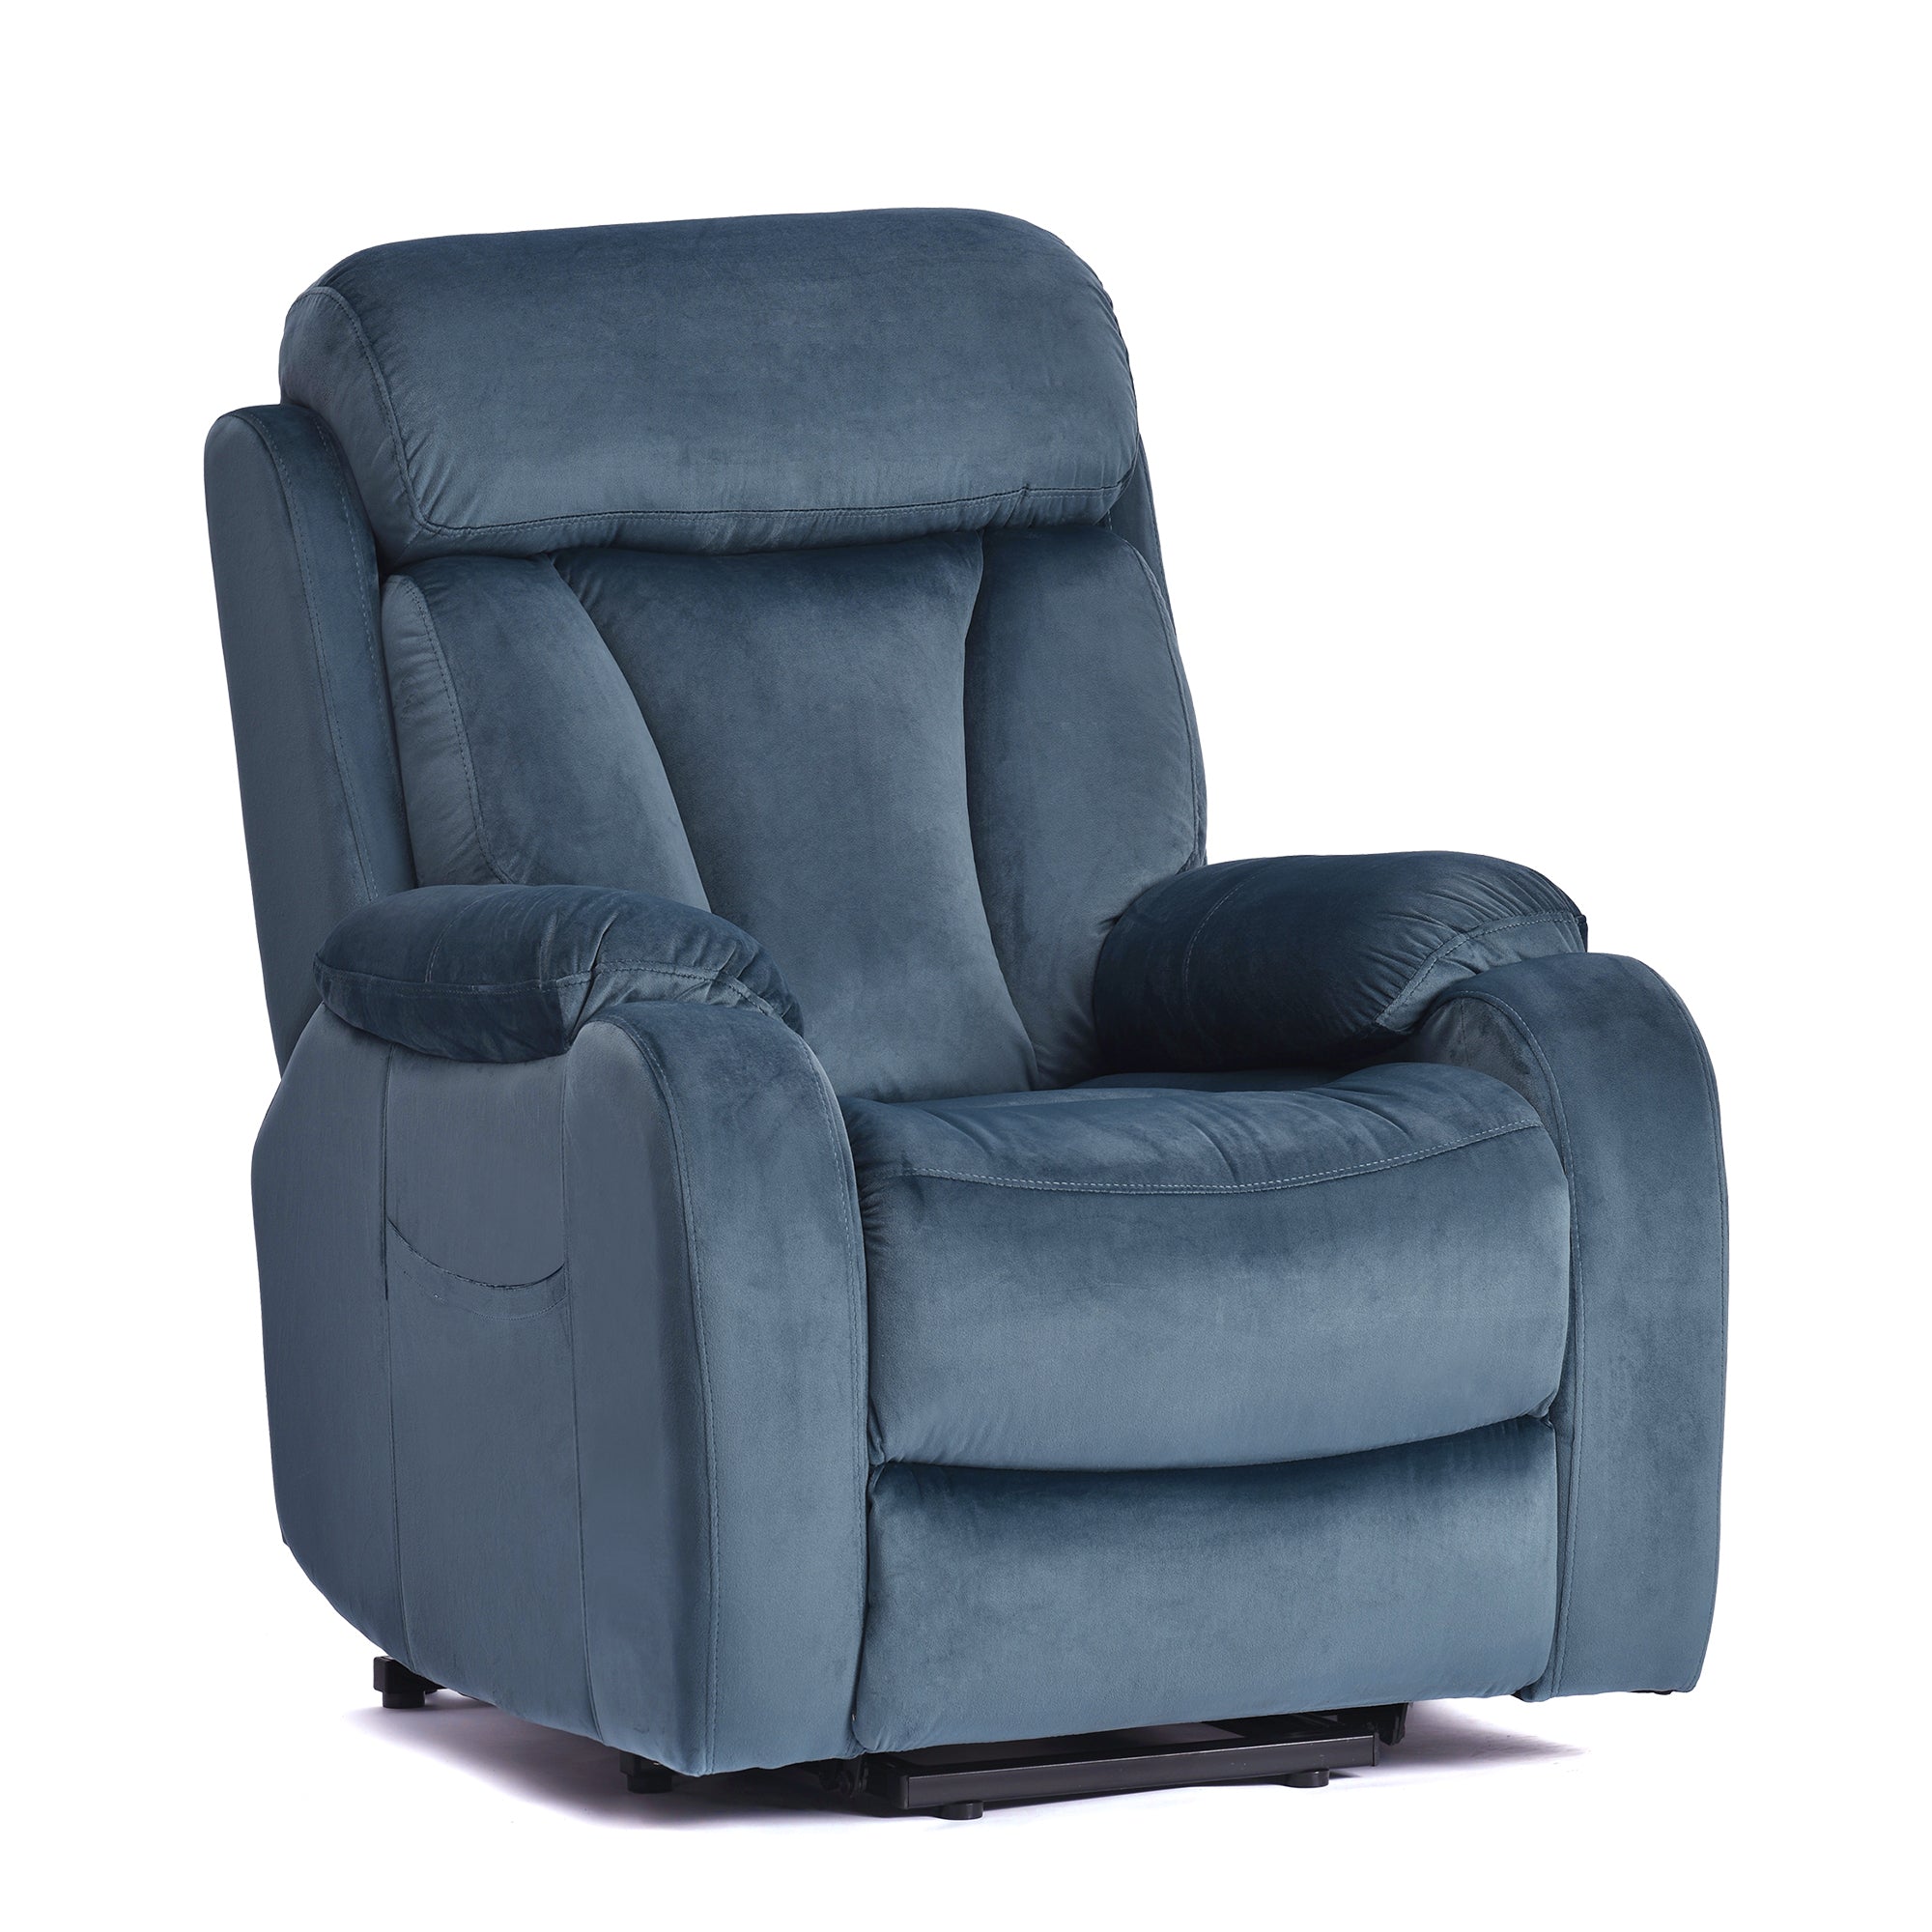 Lift Chair Recliner with Australia Cashmere Fabric, angle view seated